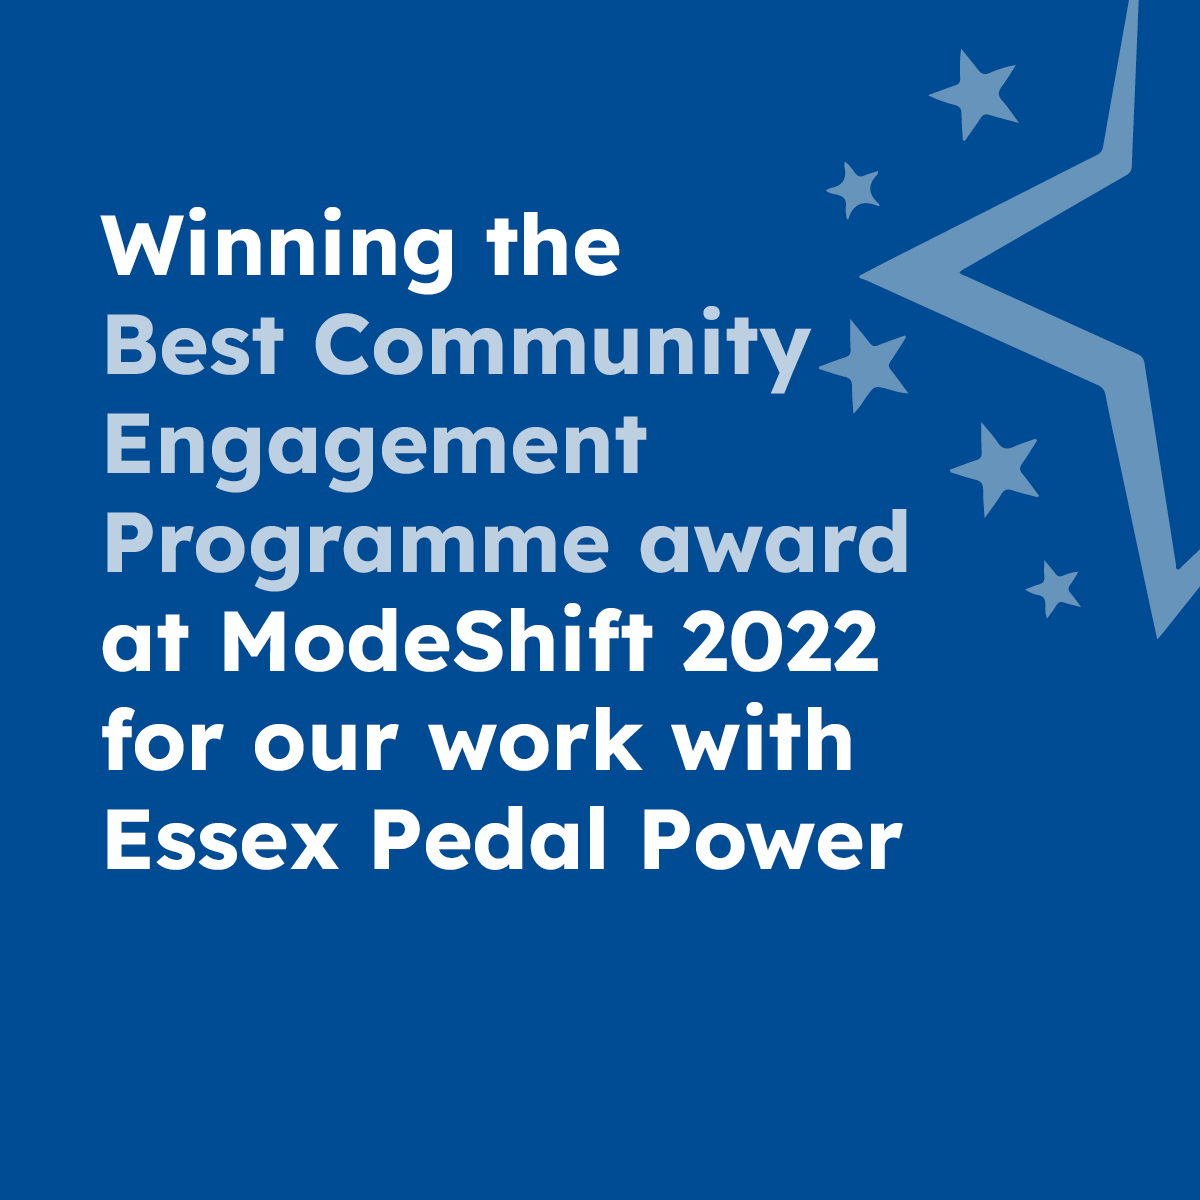 Winning the best Community Engagement Programme award at ModeShift 2022 for our work with Essex Pedal Power